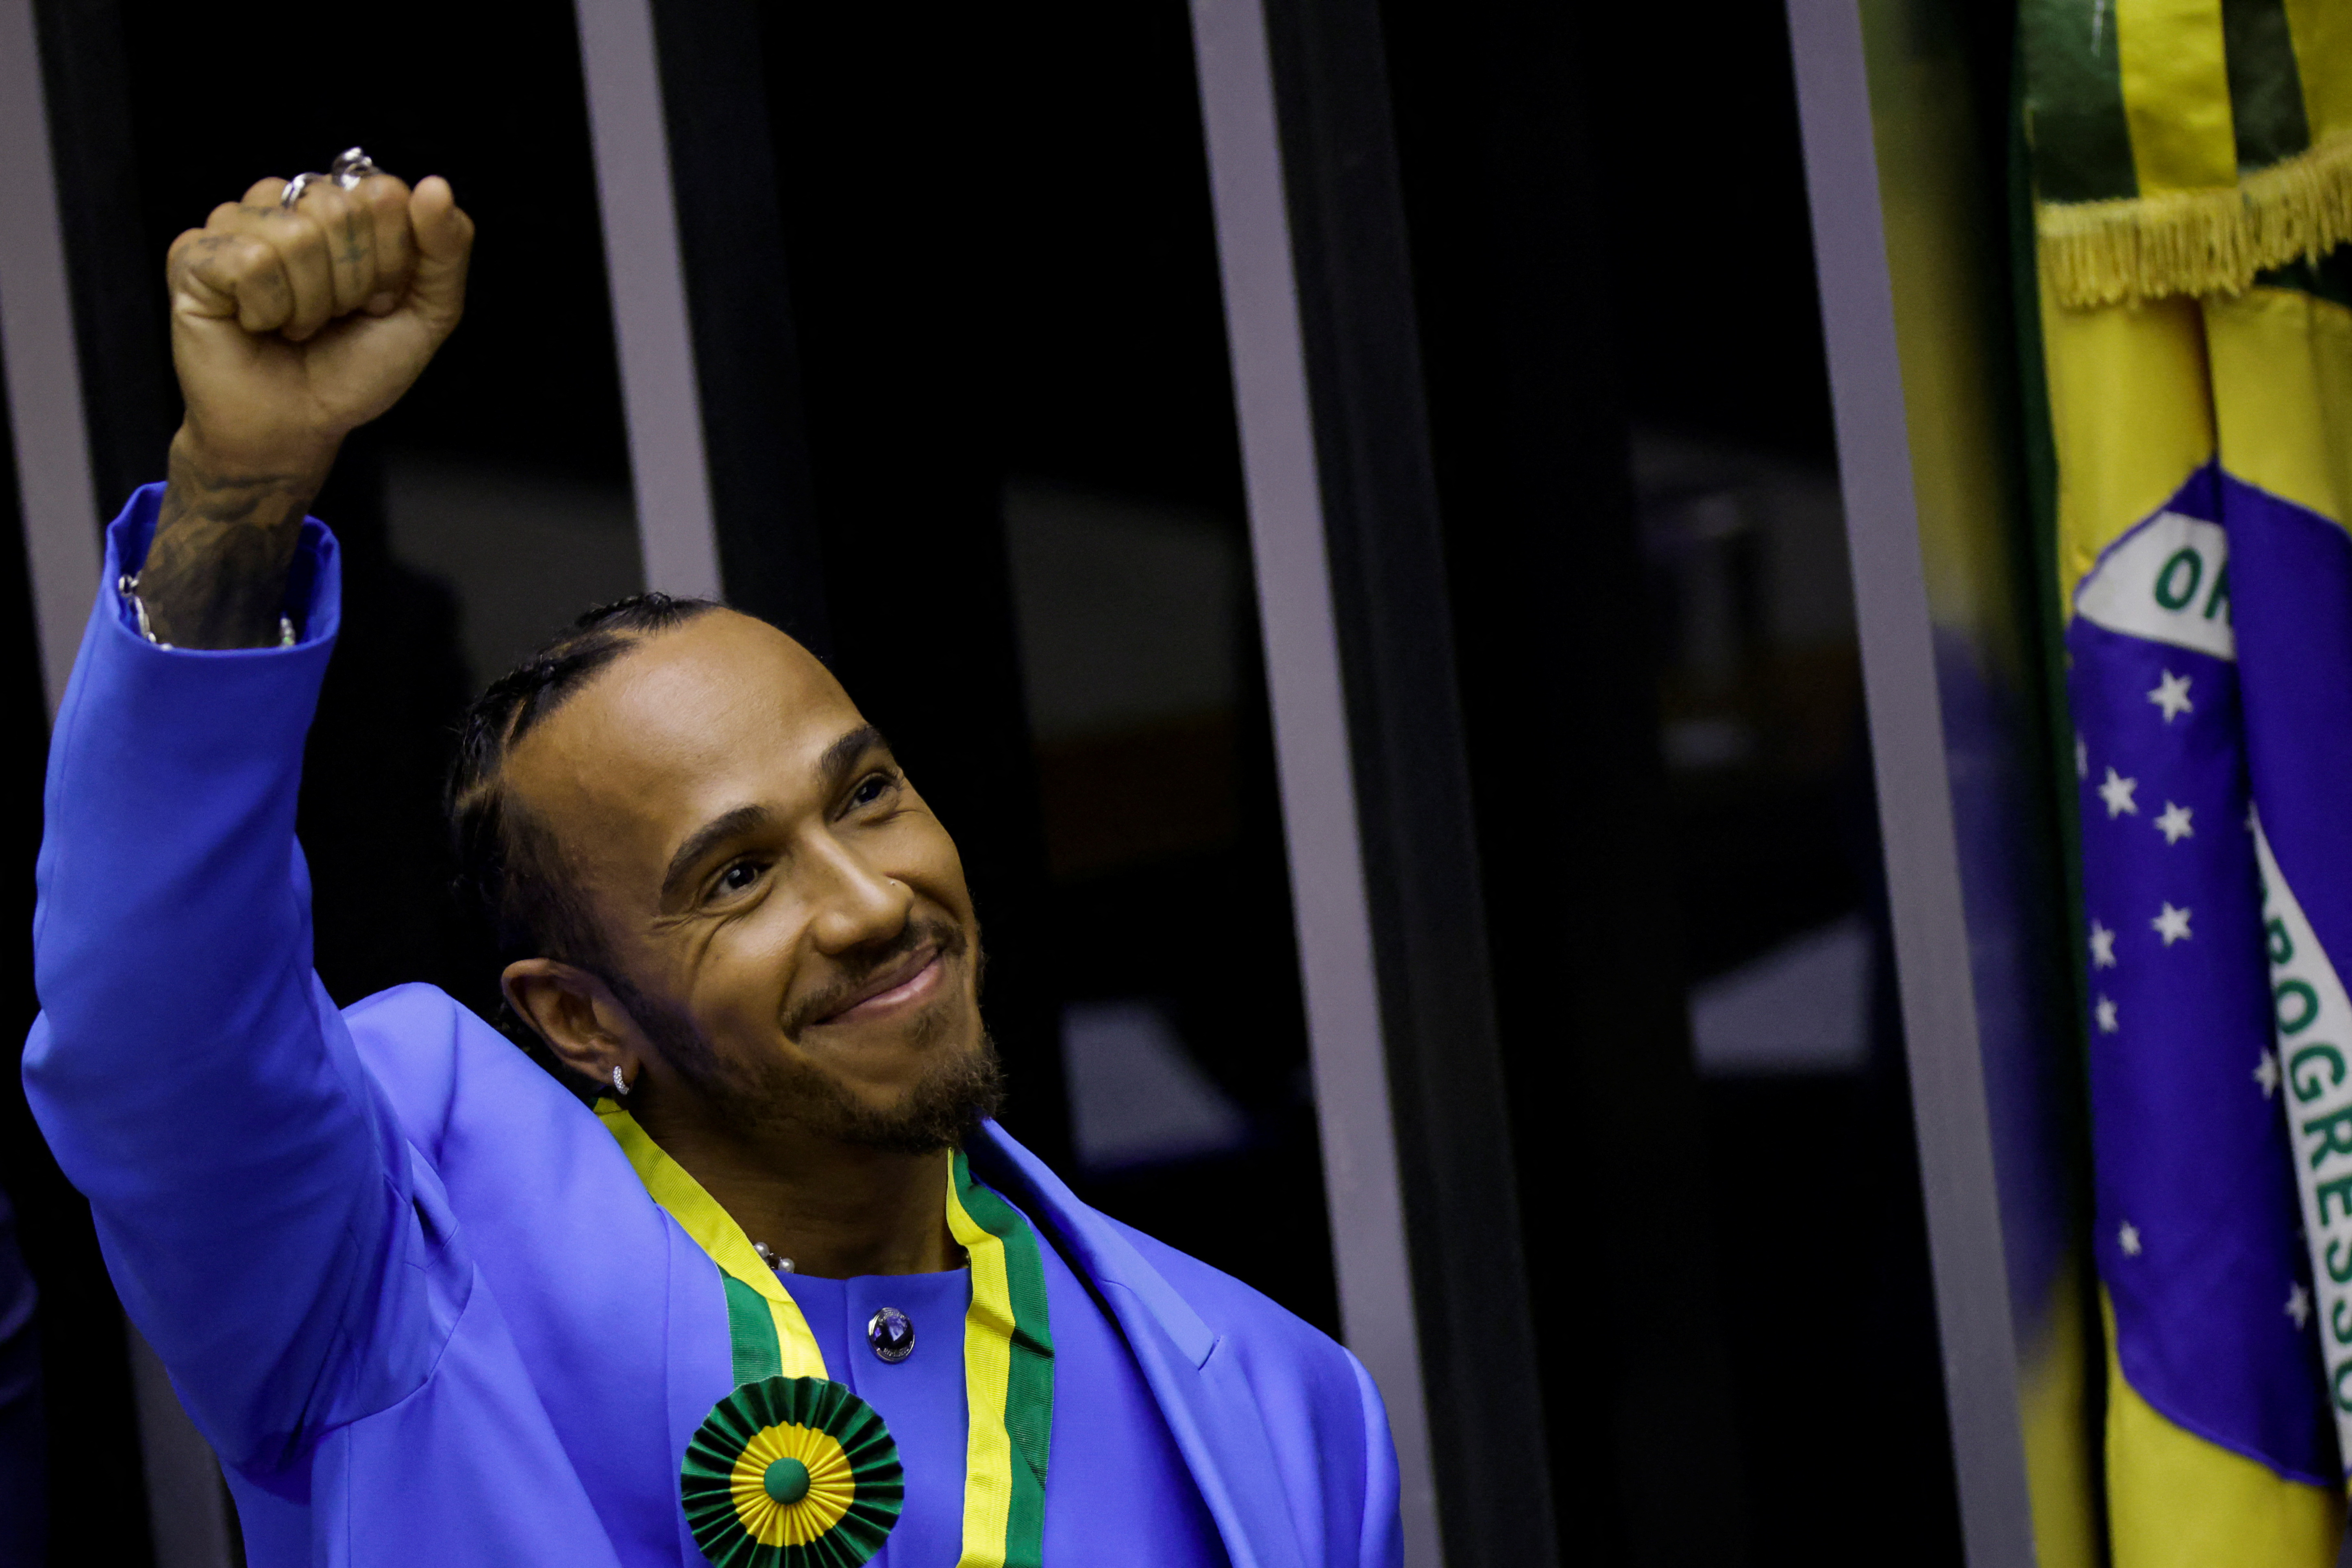 Lewis Hamilton receives the title of honorary citizen of Brazil